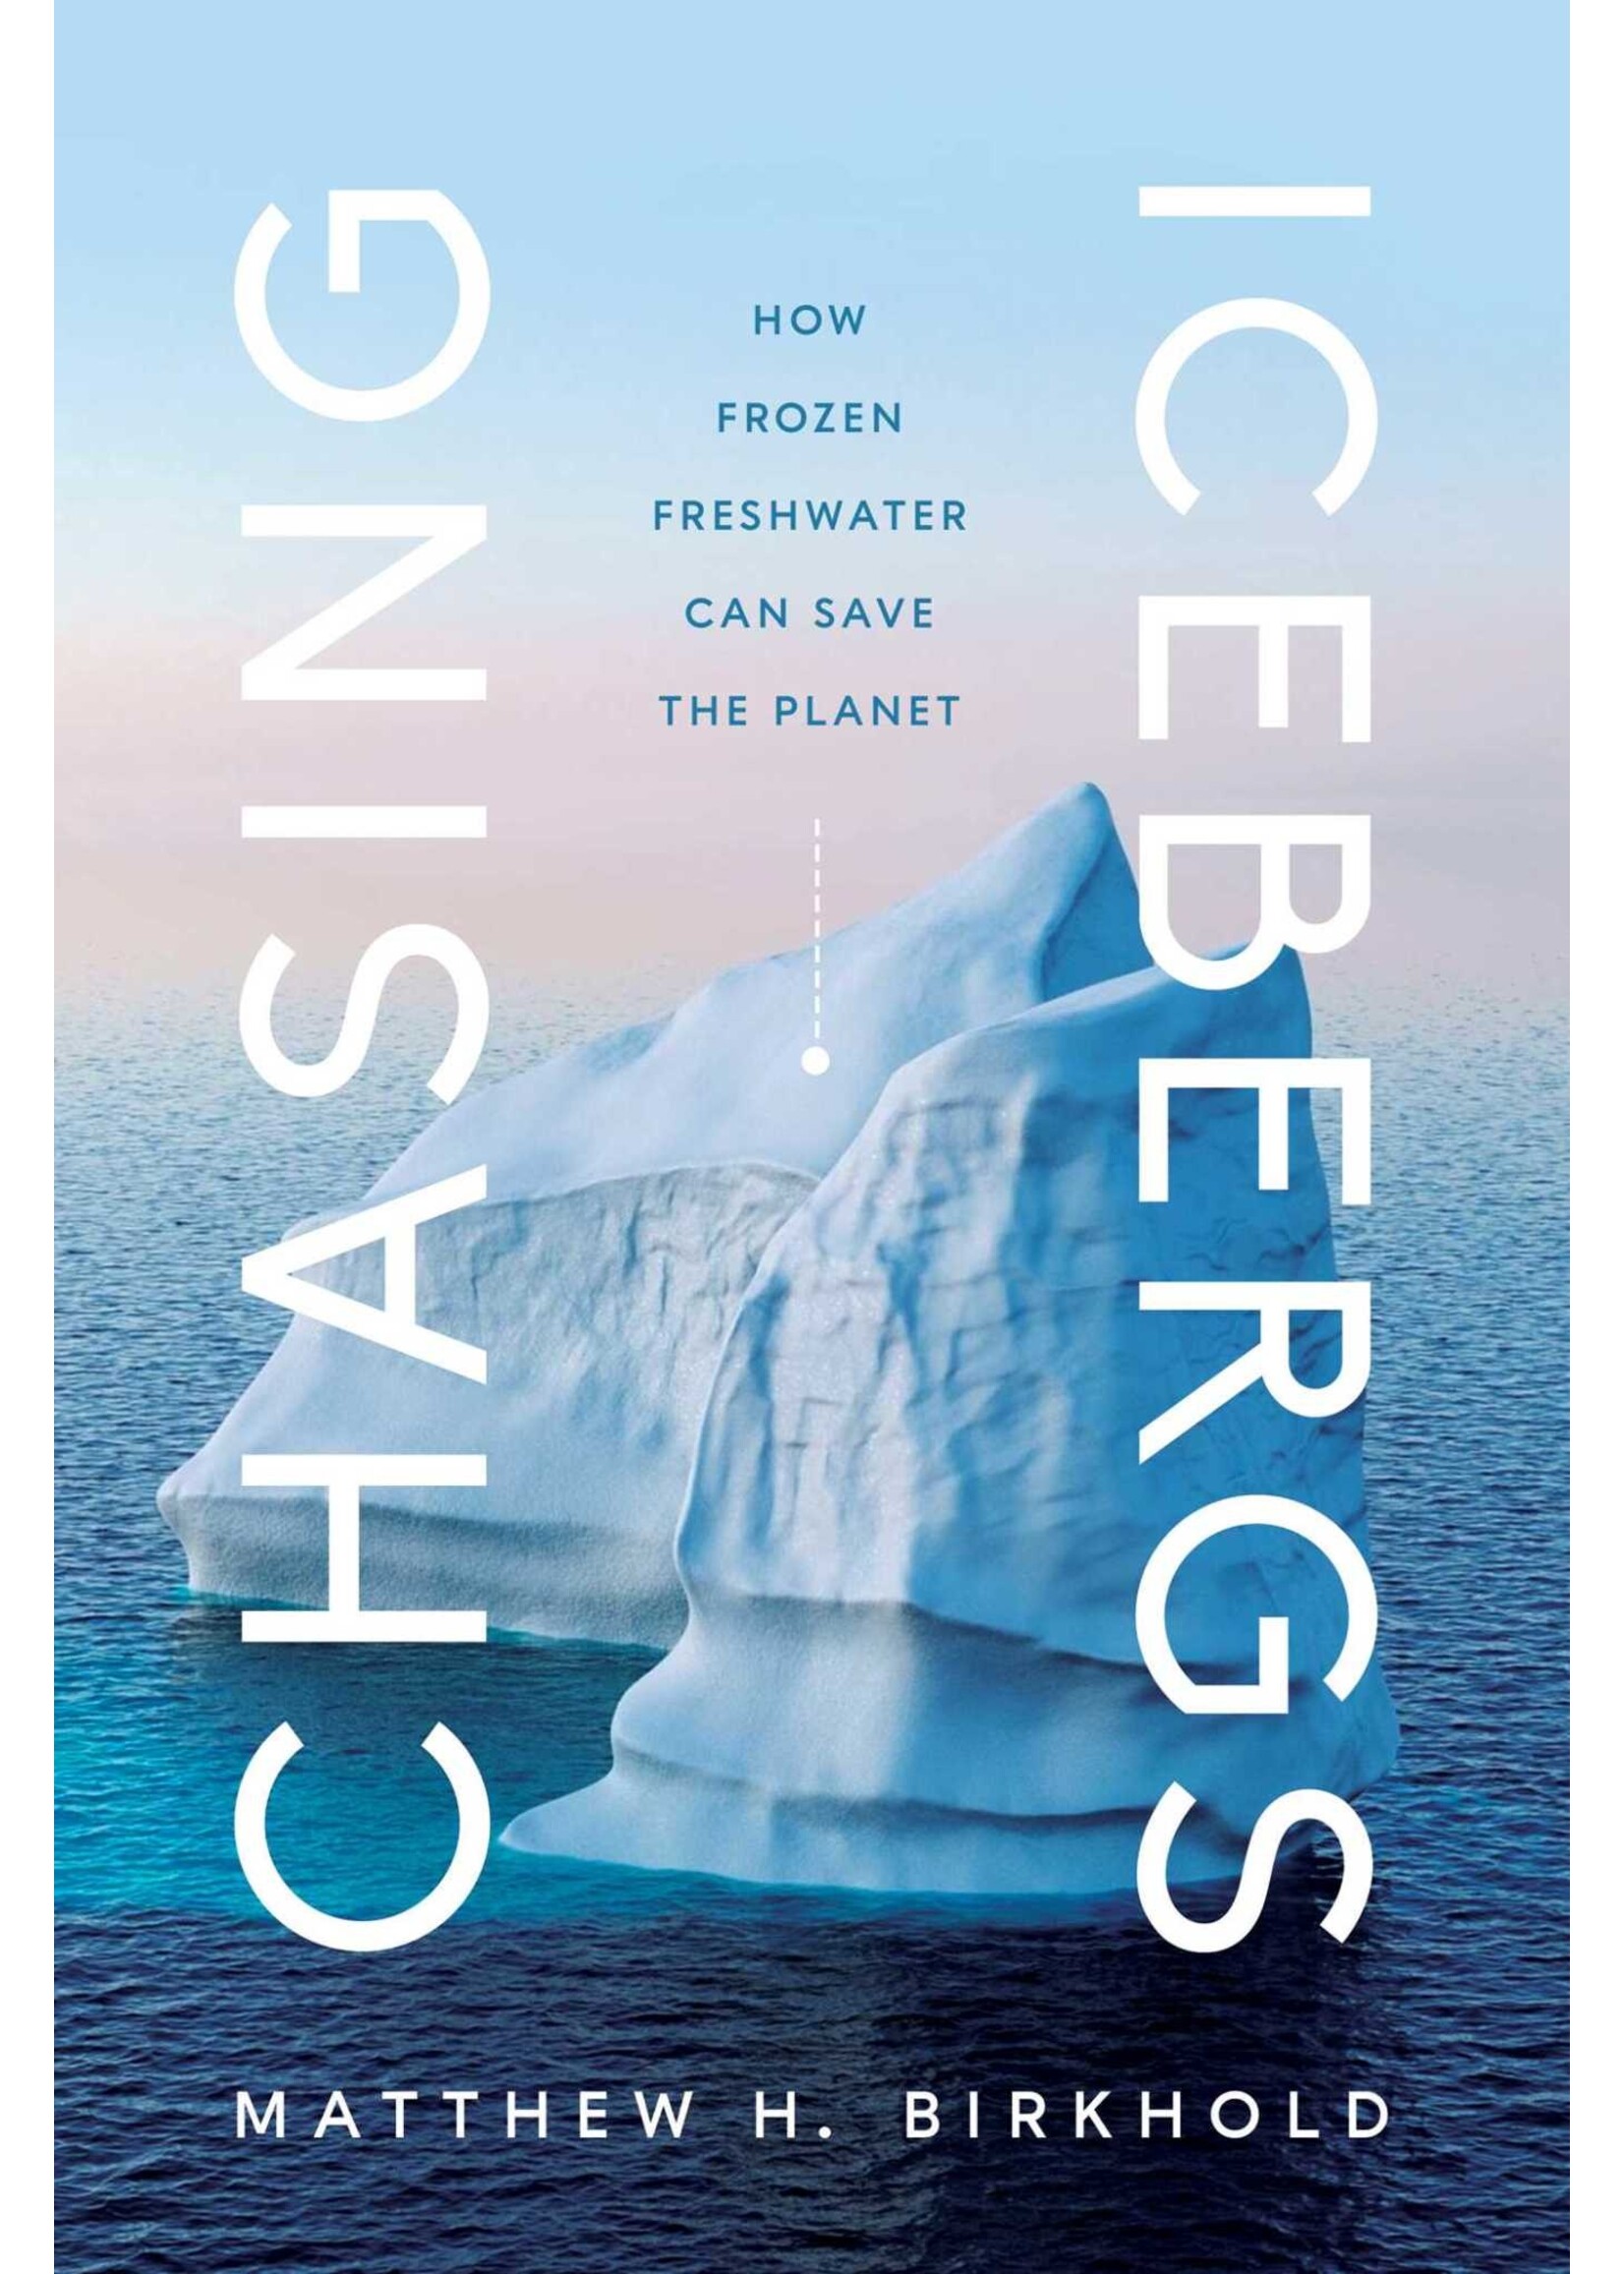 Chasing Icebergs: How Frozen Freshwater Can Save the Planet by Matthew H. Birkhold